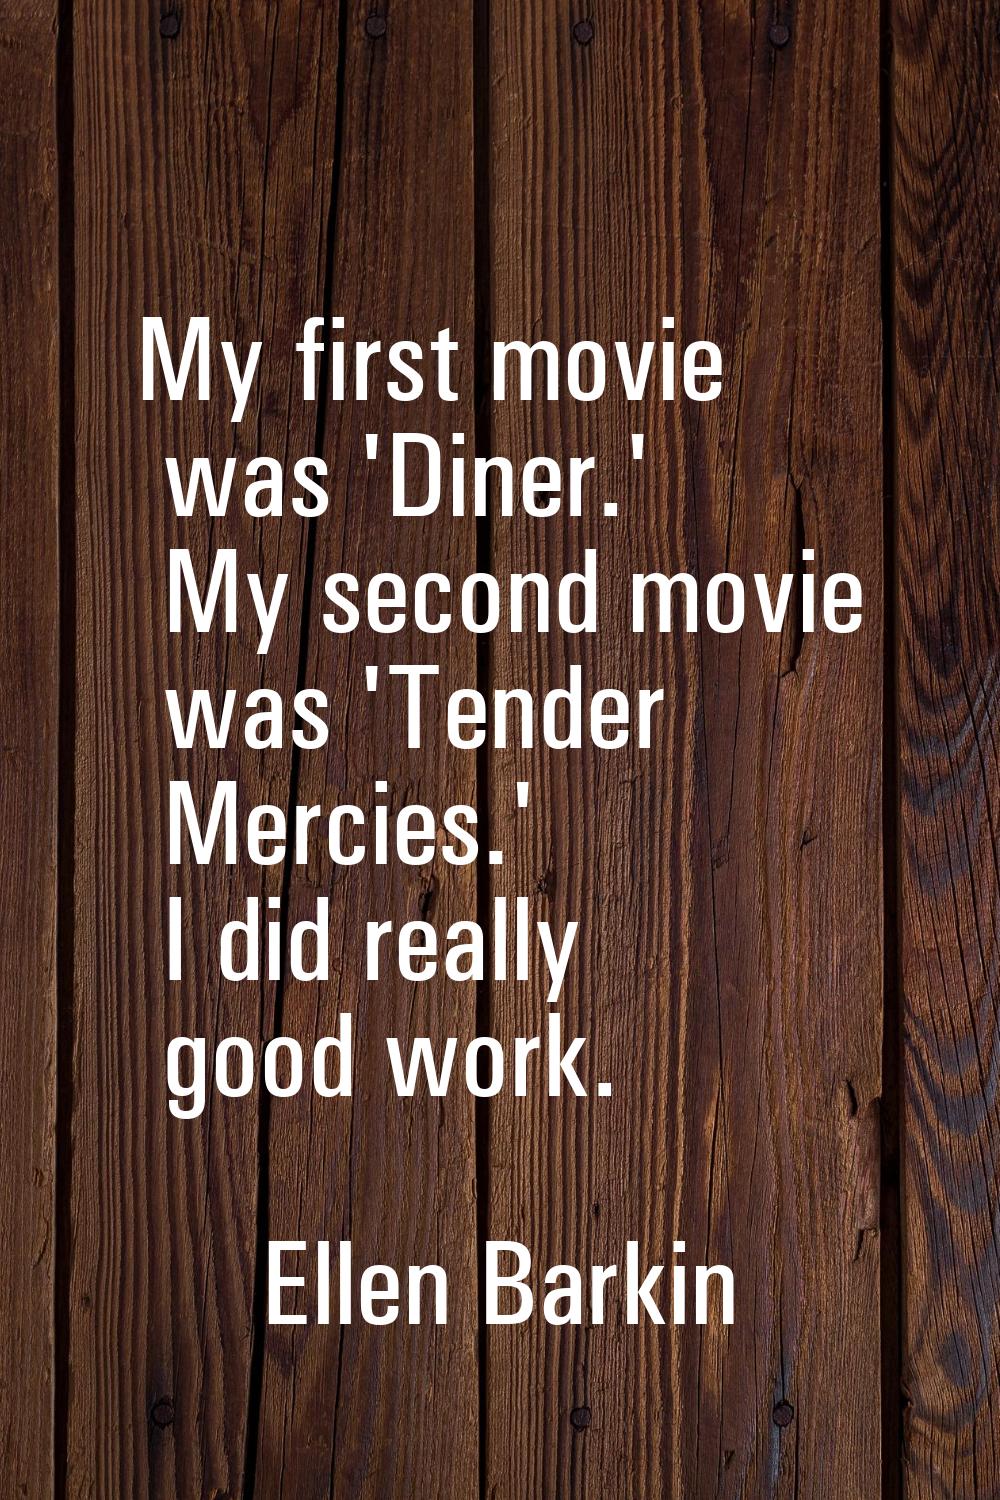 My first movie was 'Diner.' My second movie was 'Tender Mercies.' I did really good work.